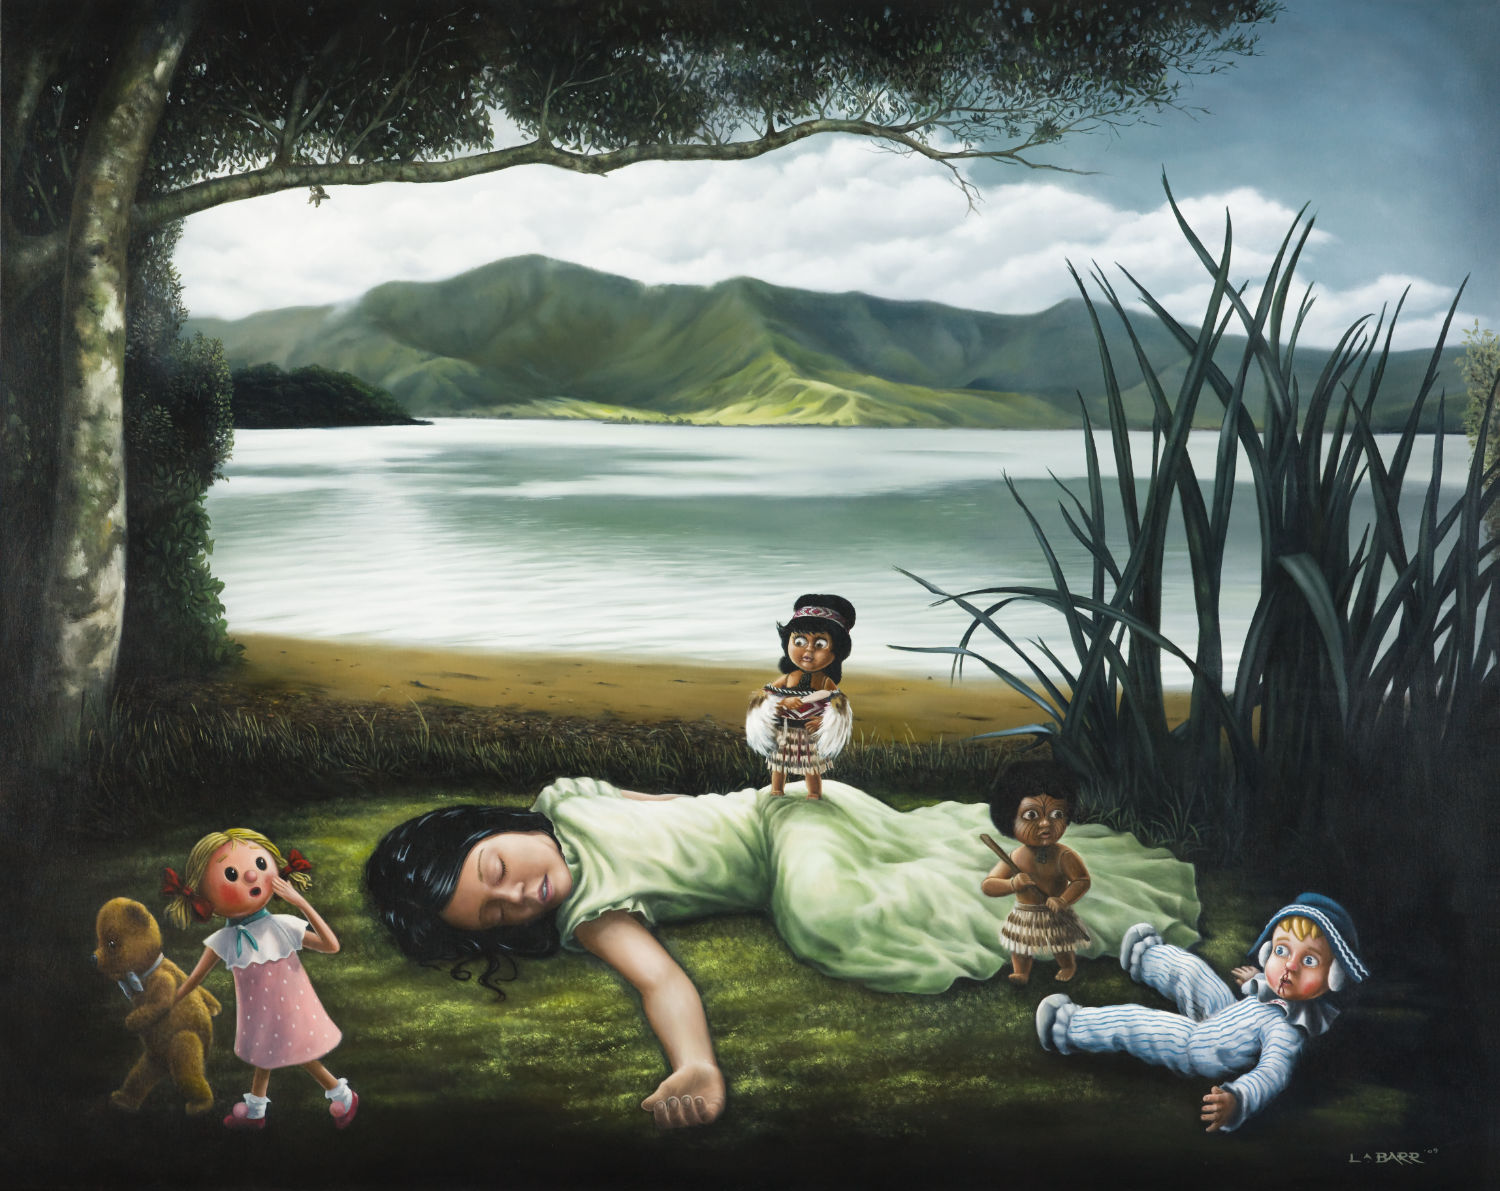 Contemporary oil painting of girl sleeping lakeside with dolls fighting